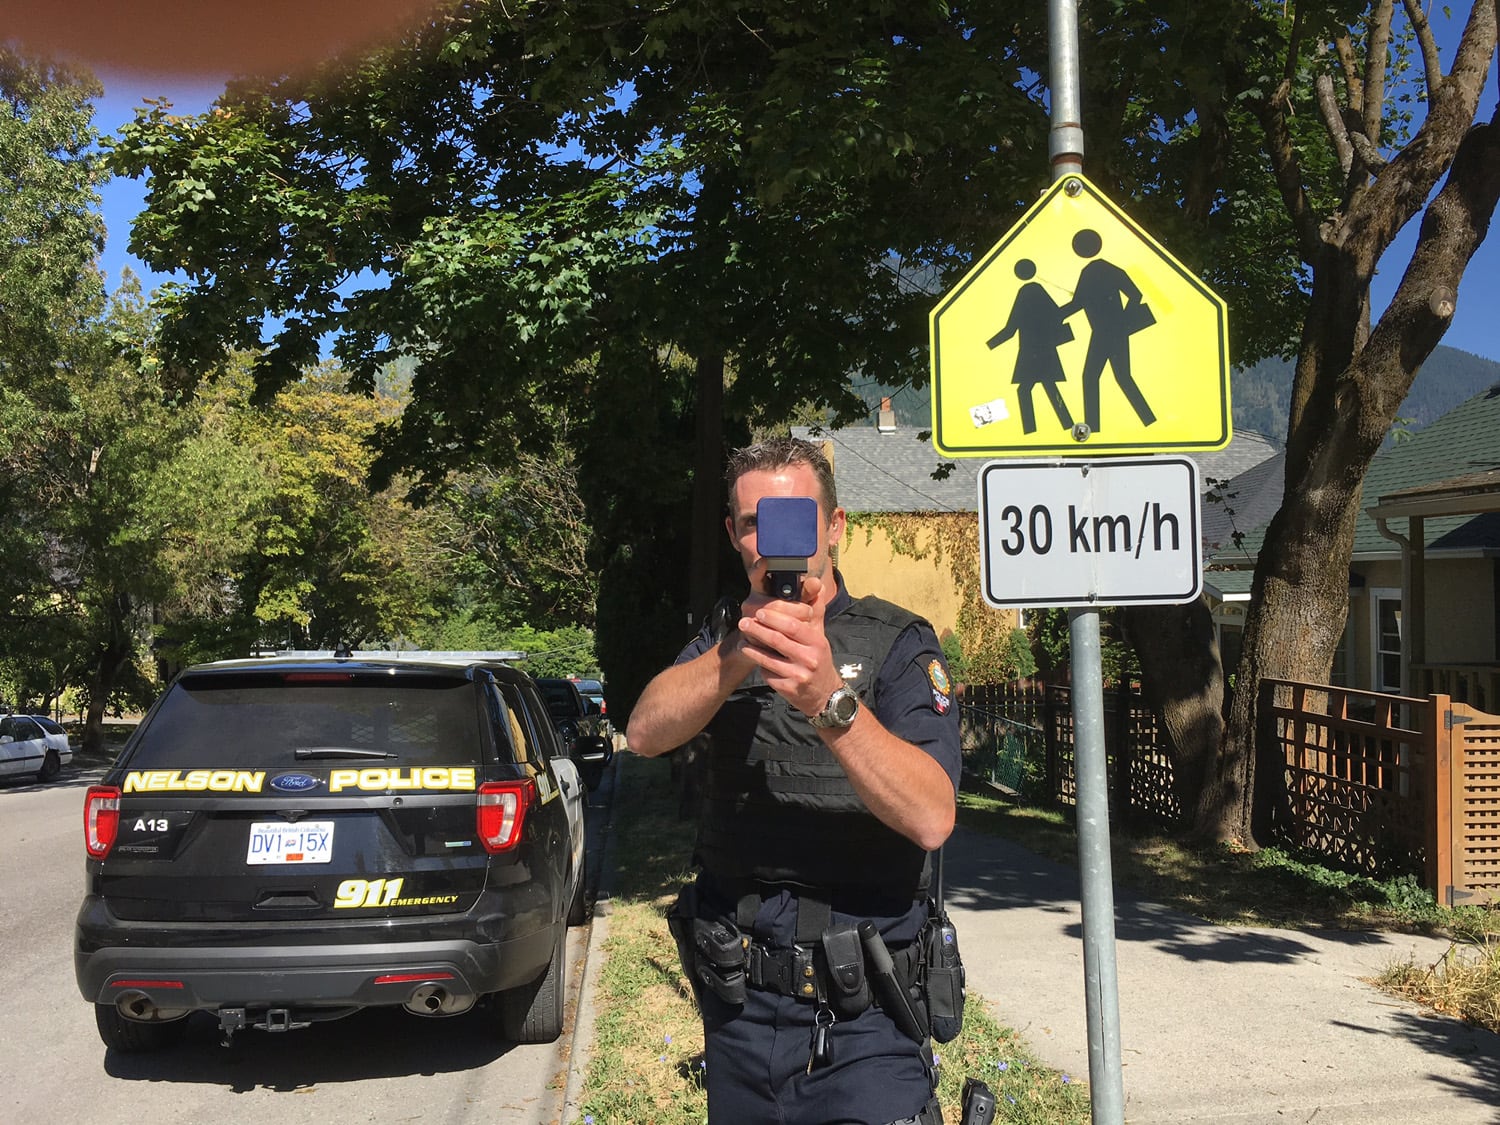 Nelson Police Remind Motorists the Kids are back in school